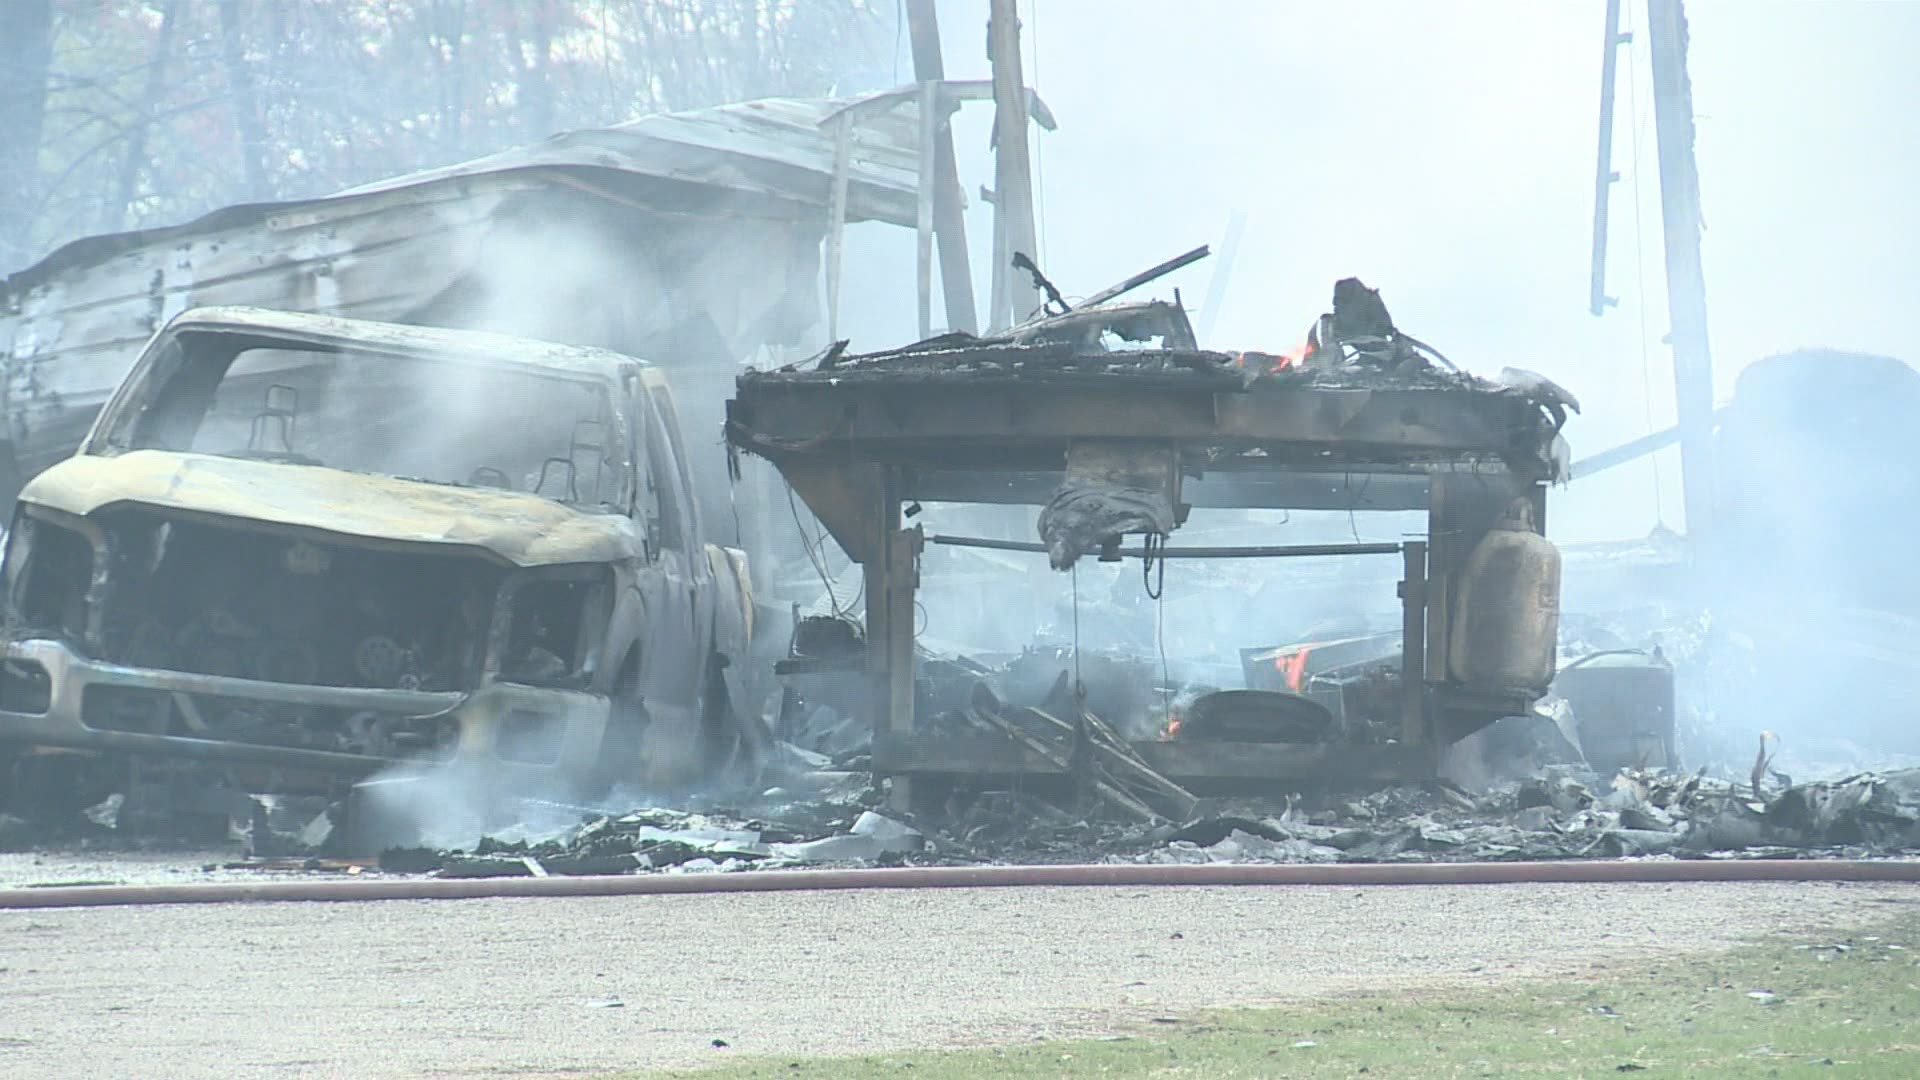 Firefighters said the fire originated at a propane tank in between the house and the garage.